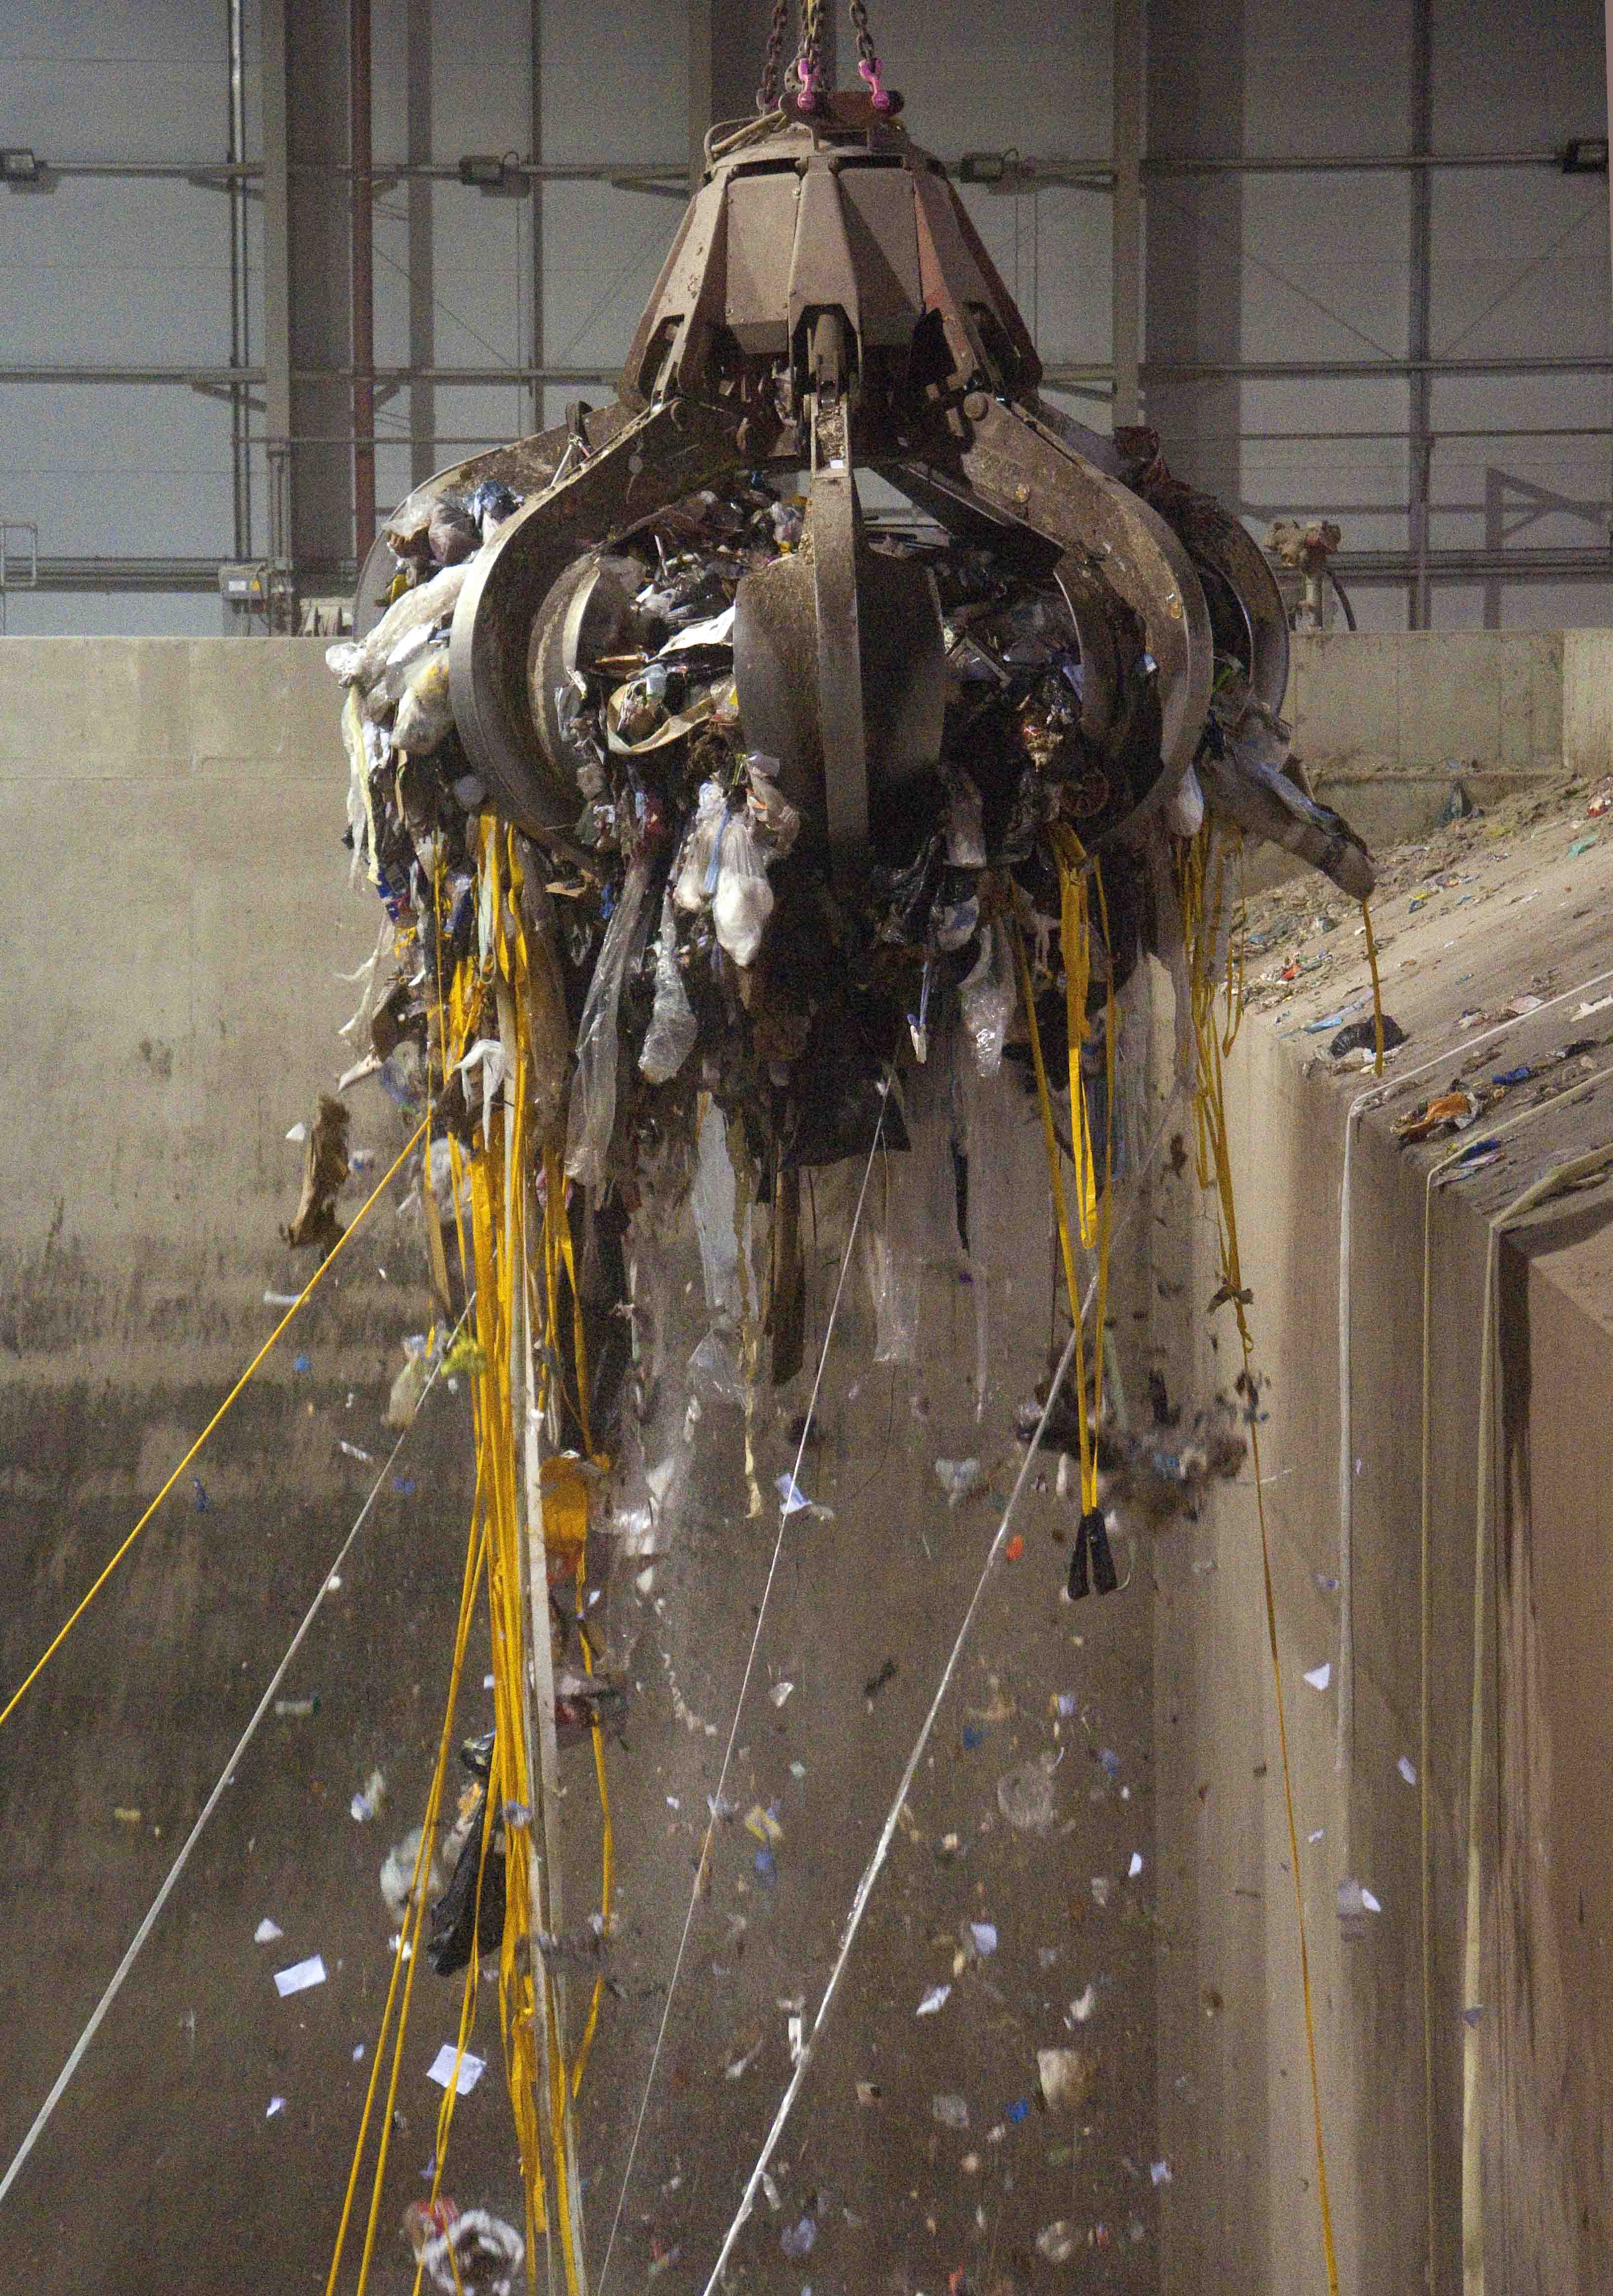 A giant claw lifting general waste into the incinerator at the Energy from Waste plant © Science Museum